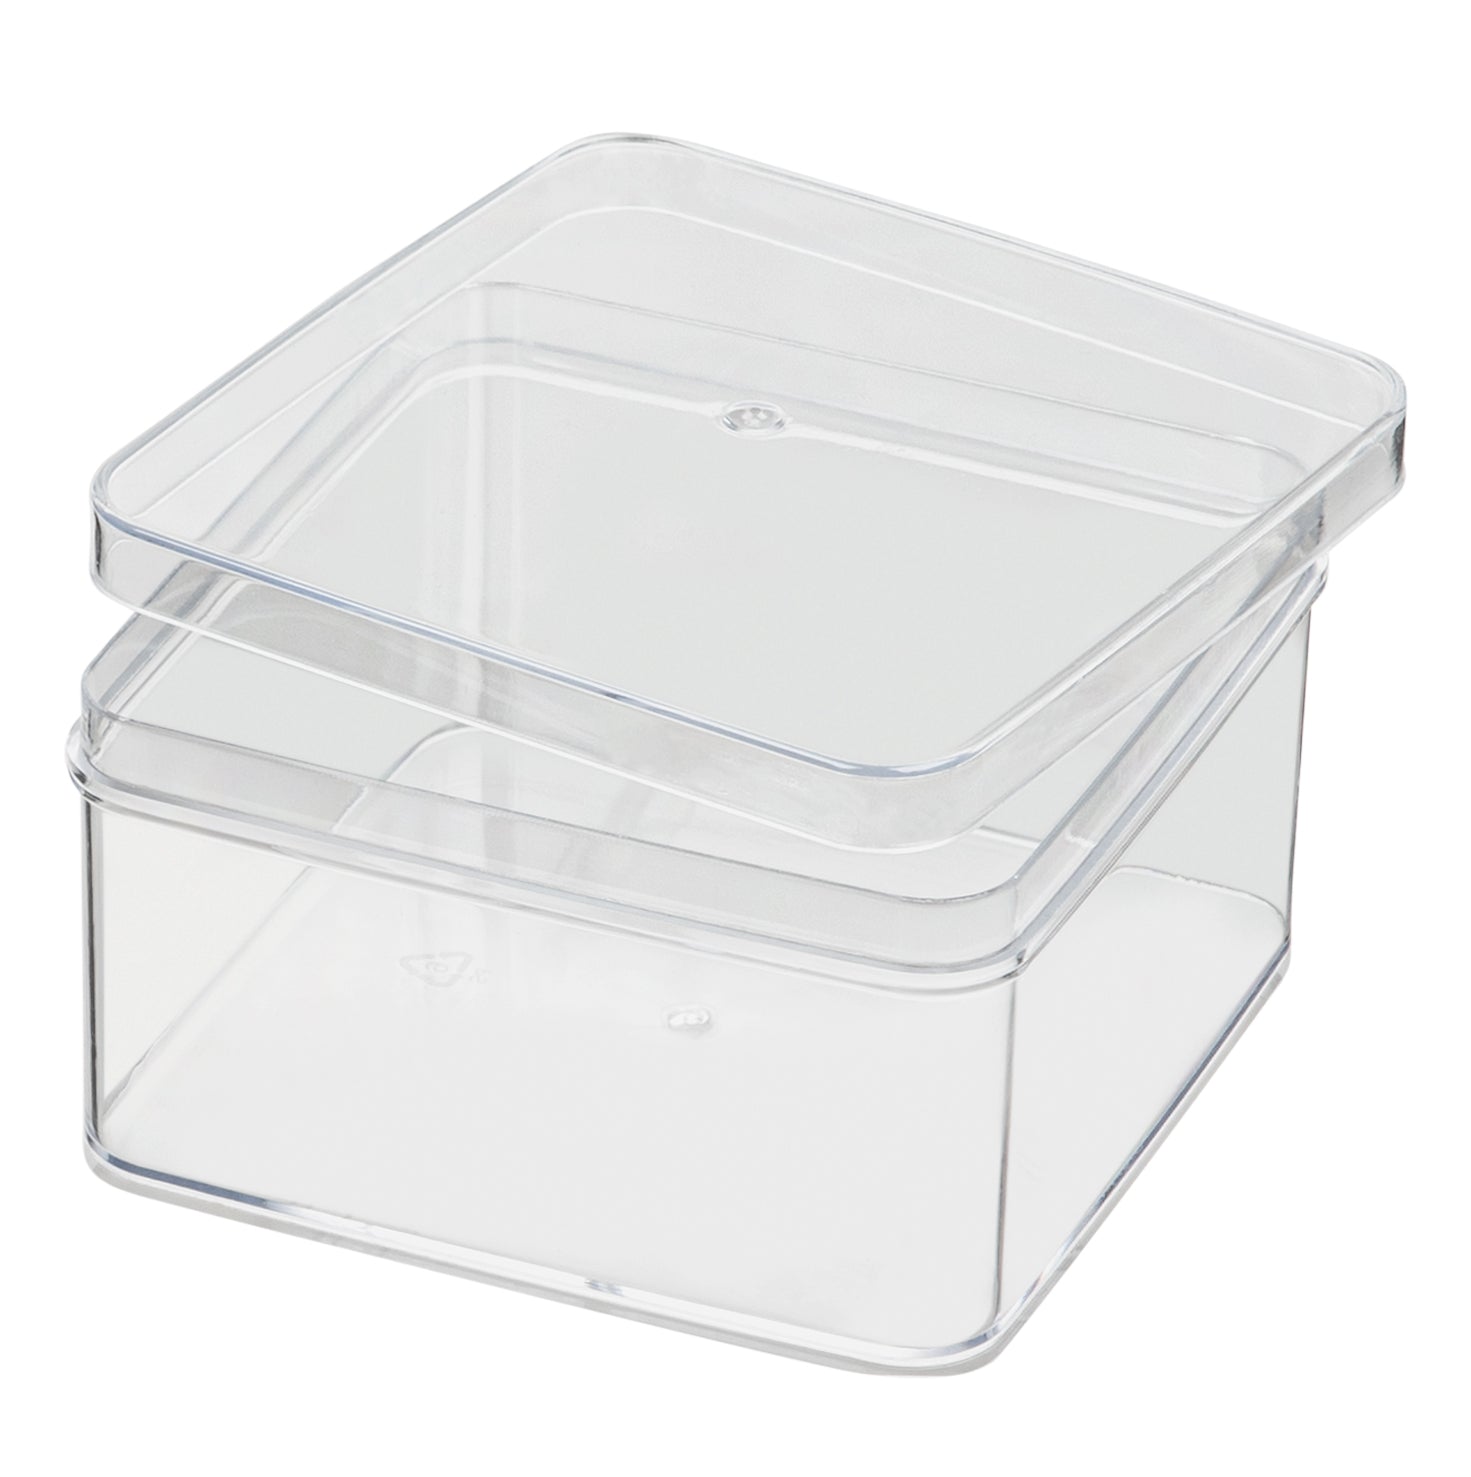 Clear Acrylic Boxes with Lid 3.15x3.15x2.375 Inches Pack of 8 Storage Box, Gift Box and Treat Box. Lucite Cube Display Boxes